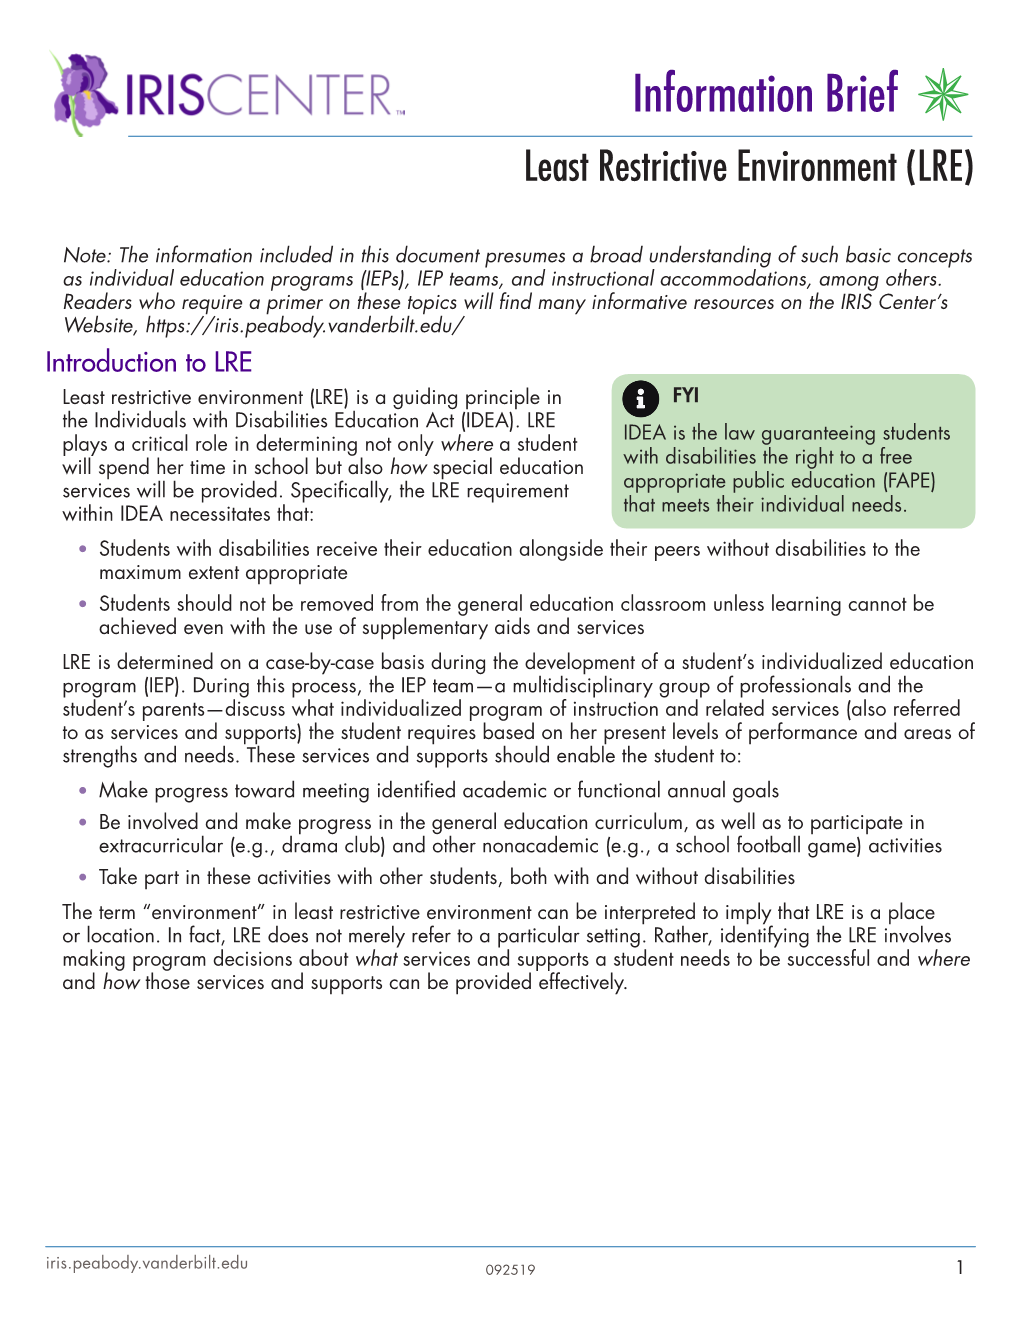 Least Restrictive Environment (LRE) Information Brief